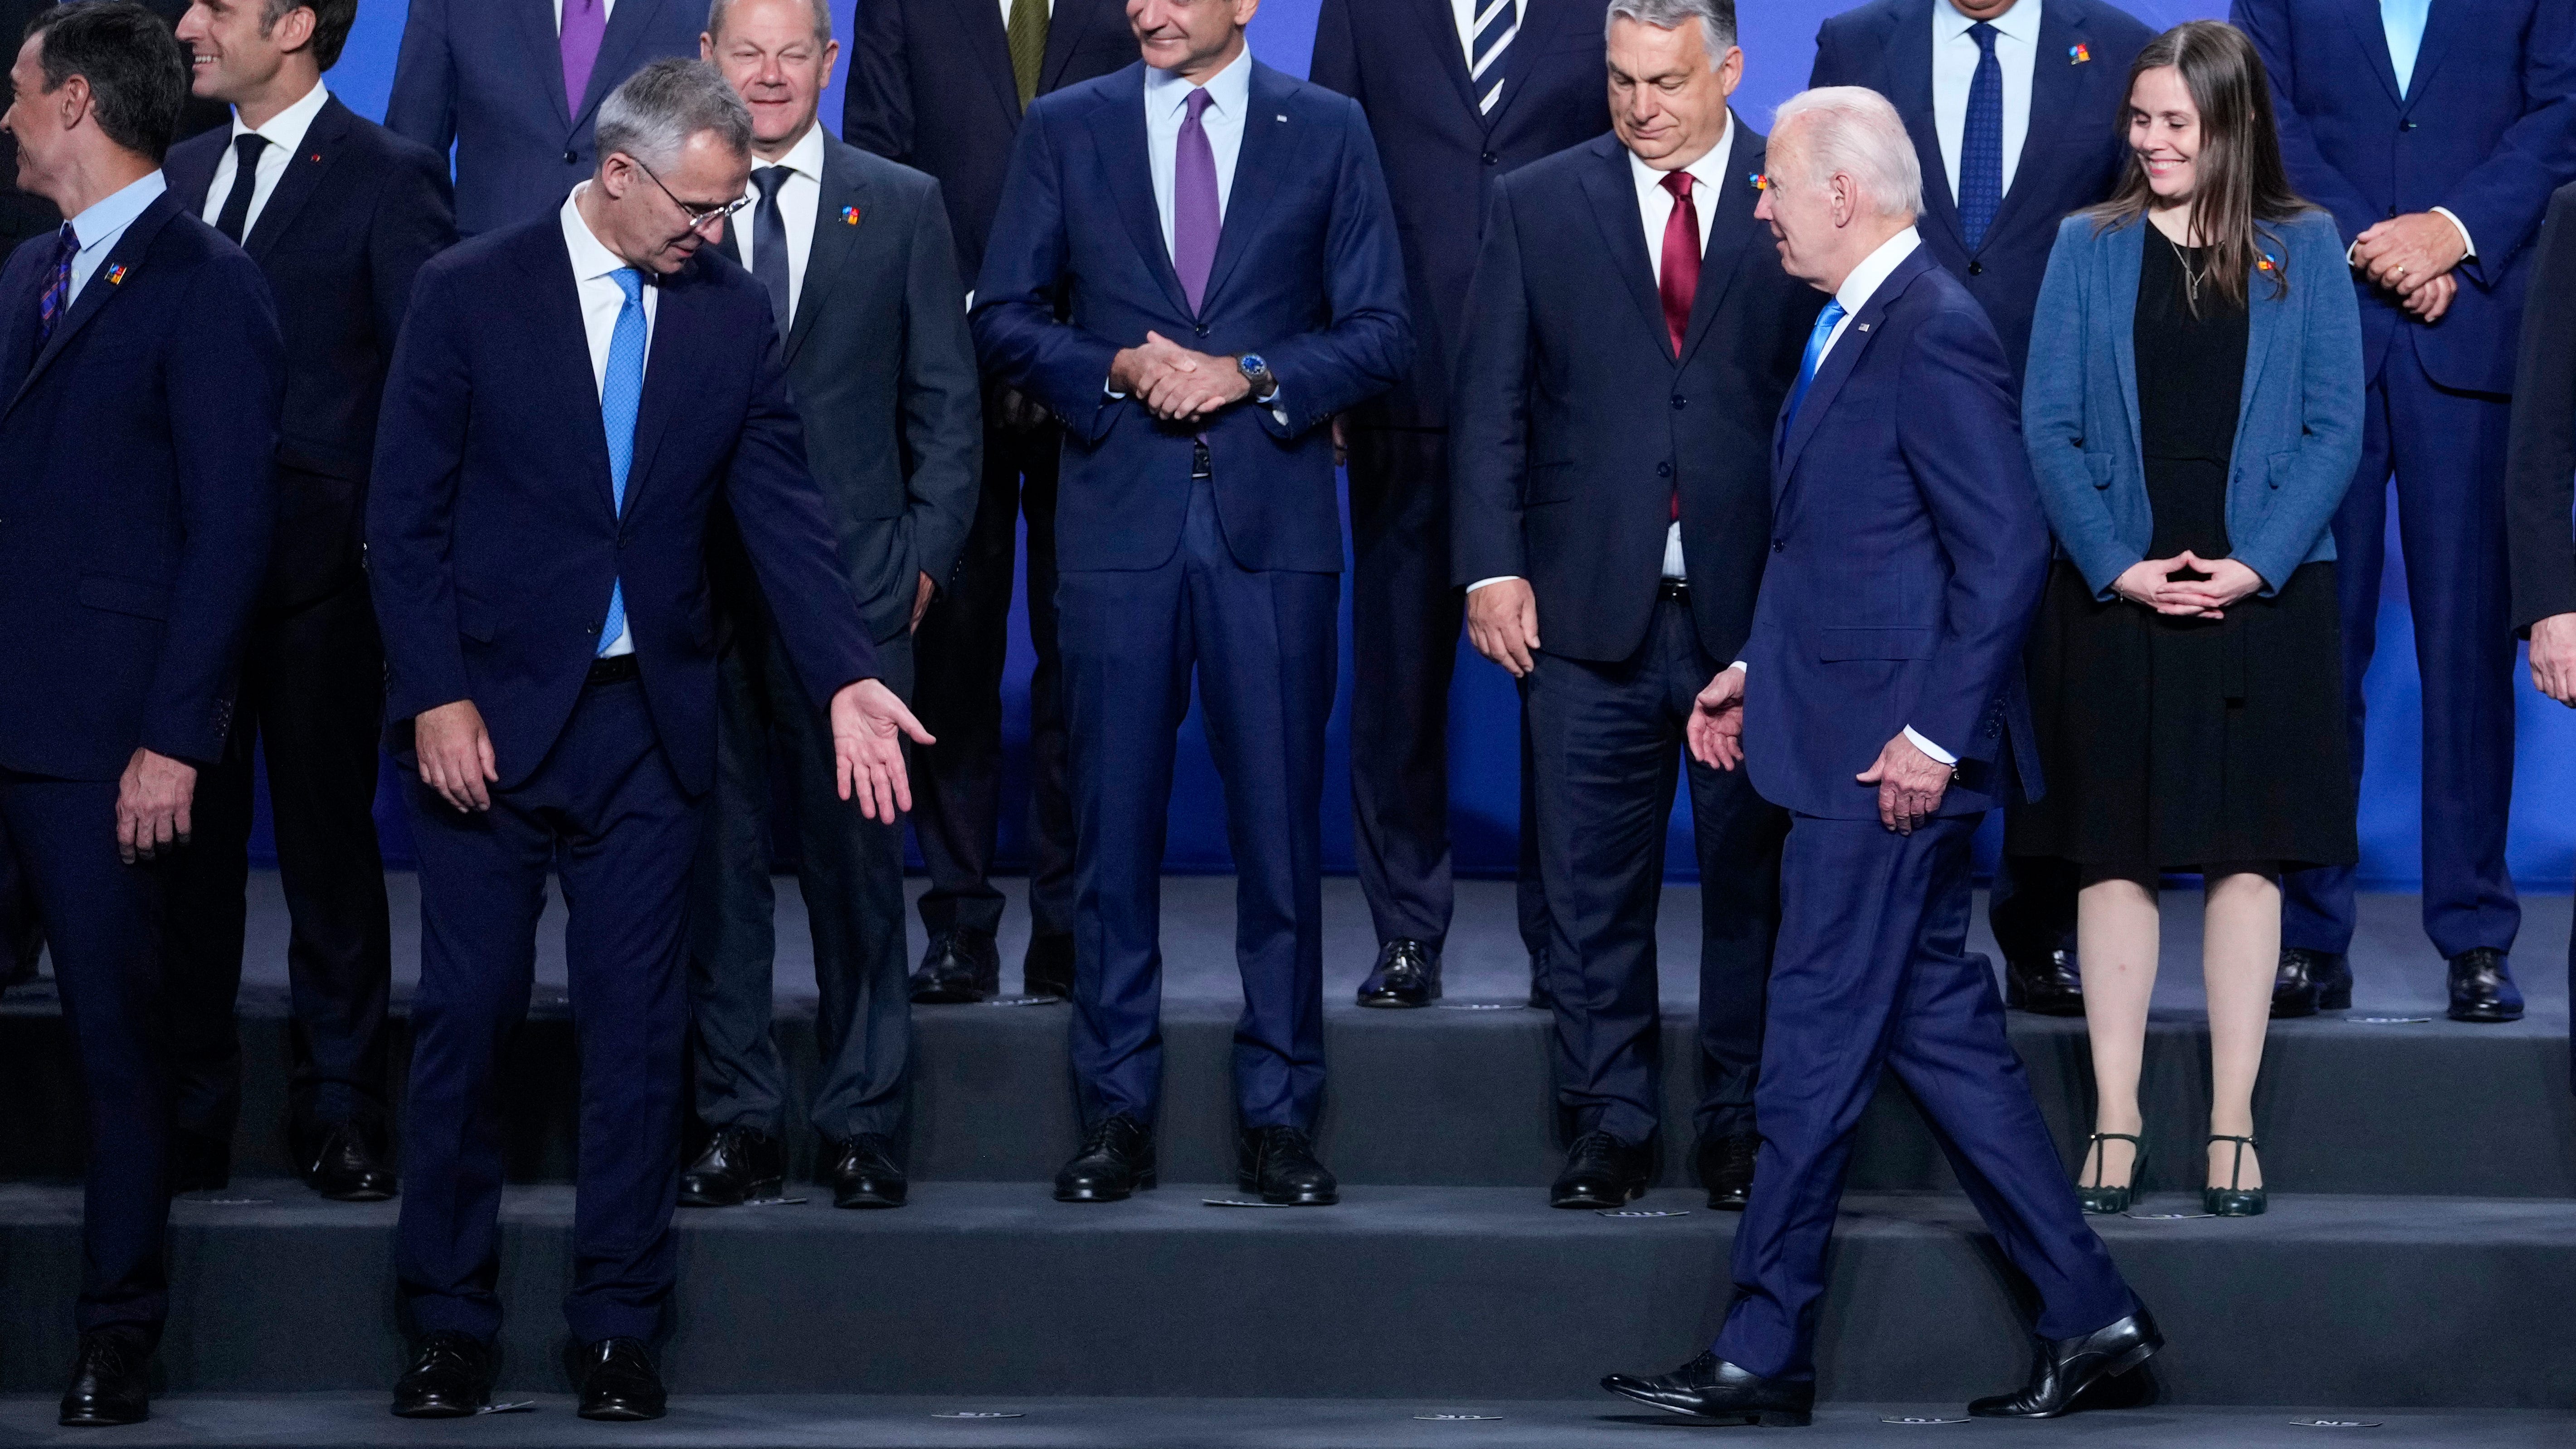 U.S. President Joe Biden, front right, arrives for a group photo during the NATO summit in Madrid, Spain, on Wednesday, June 29, 2022.